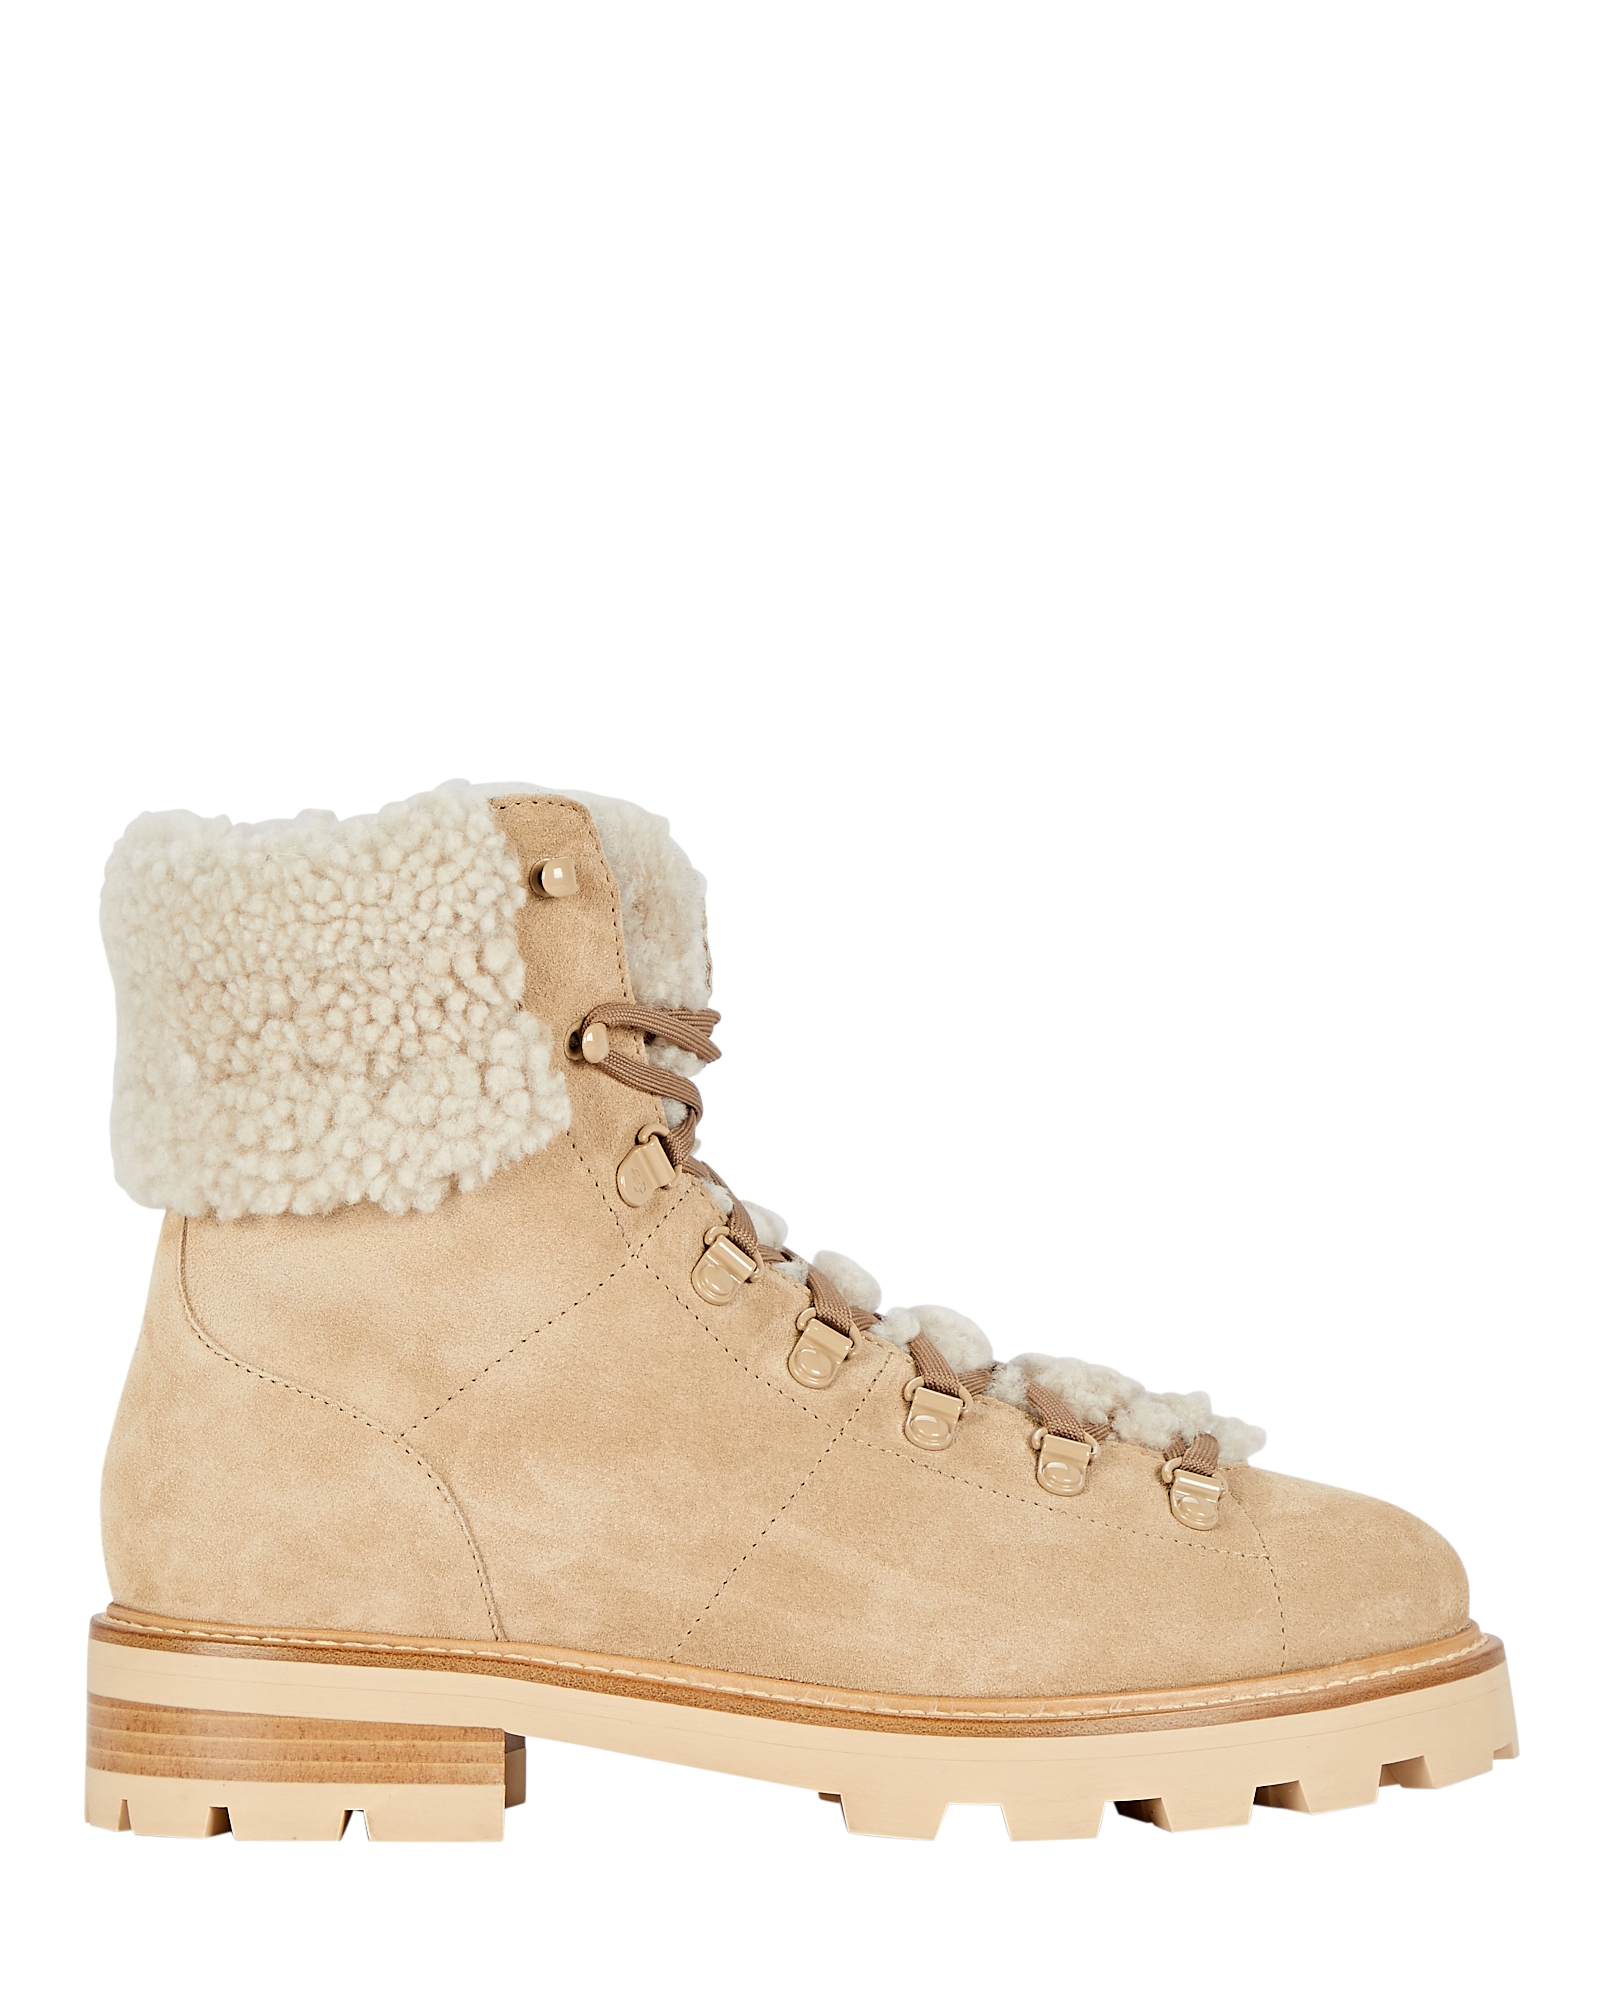 Jimmy Choo Eshe Suede Lace-Up Combat Boots | INTERMIX®